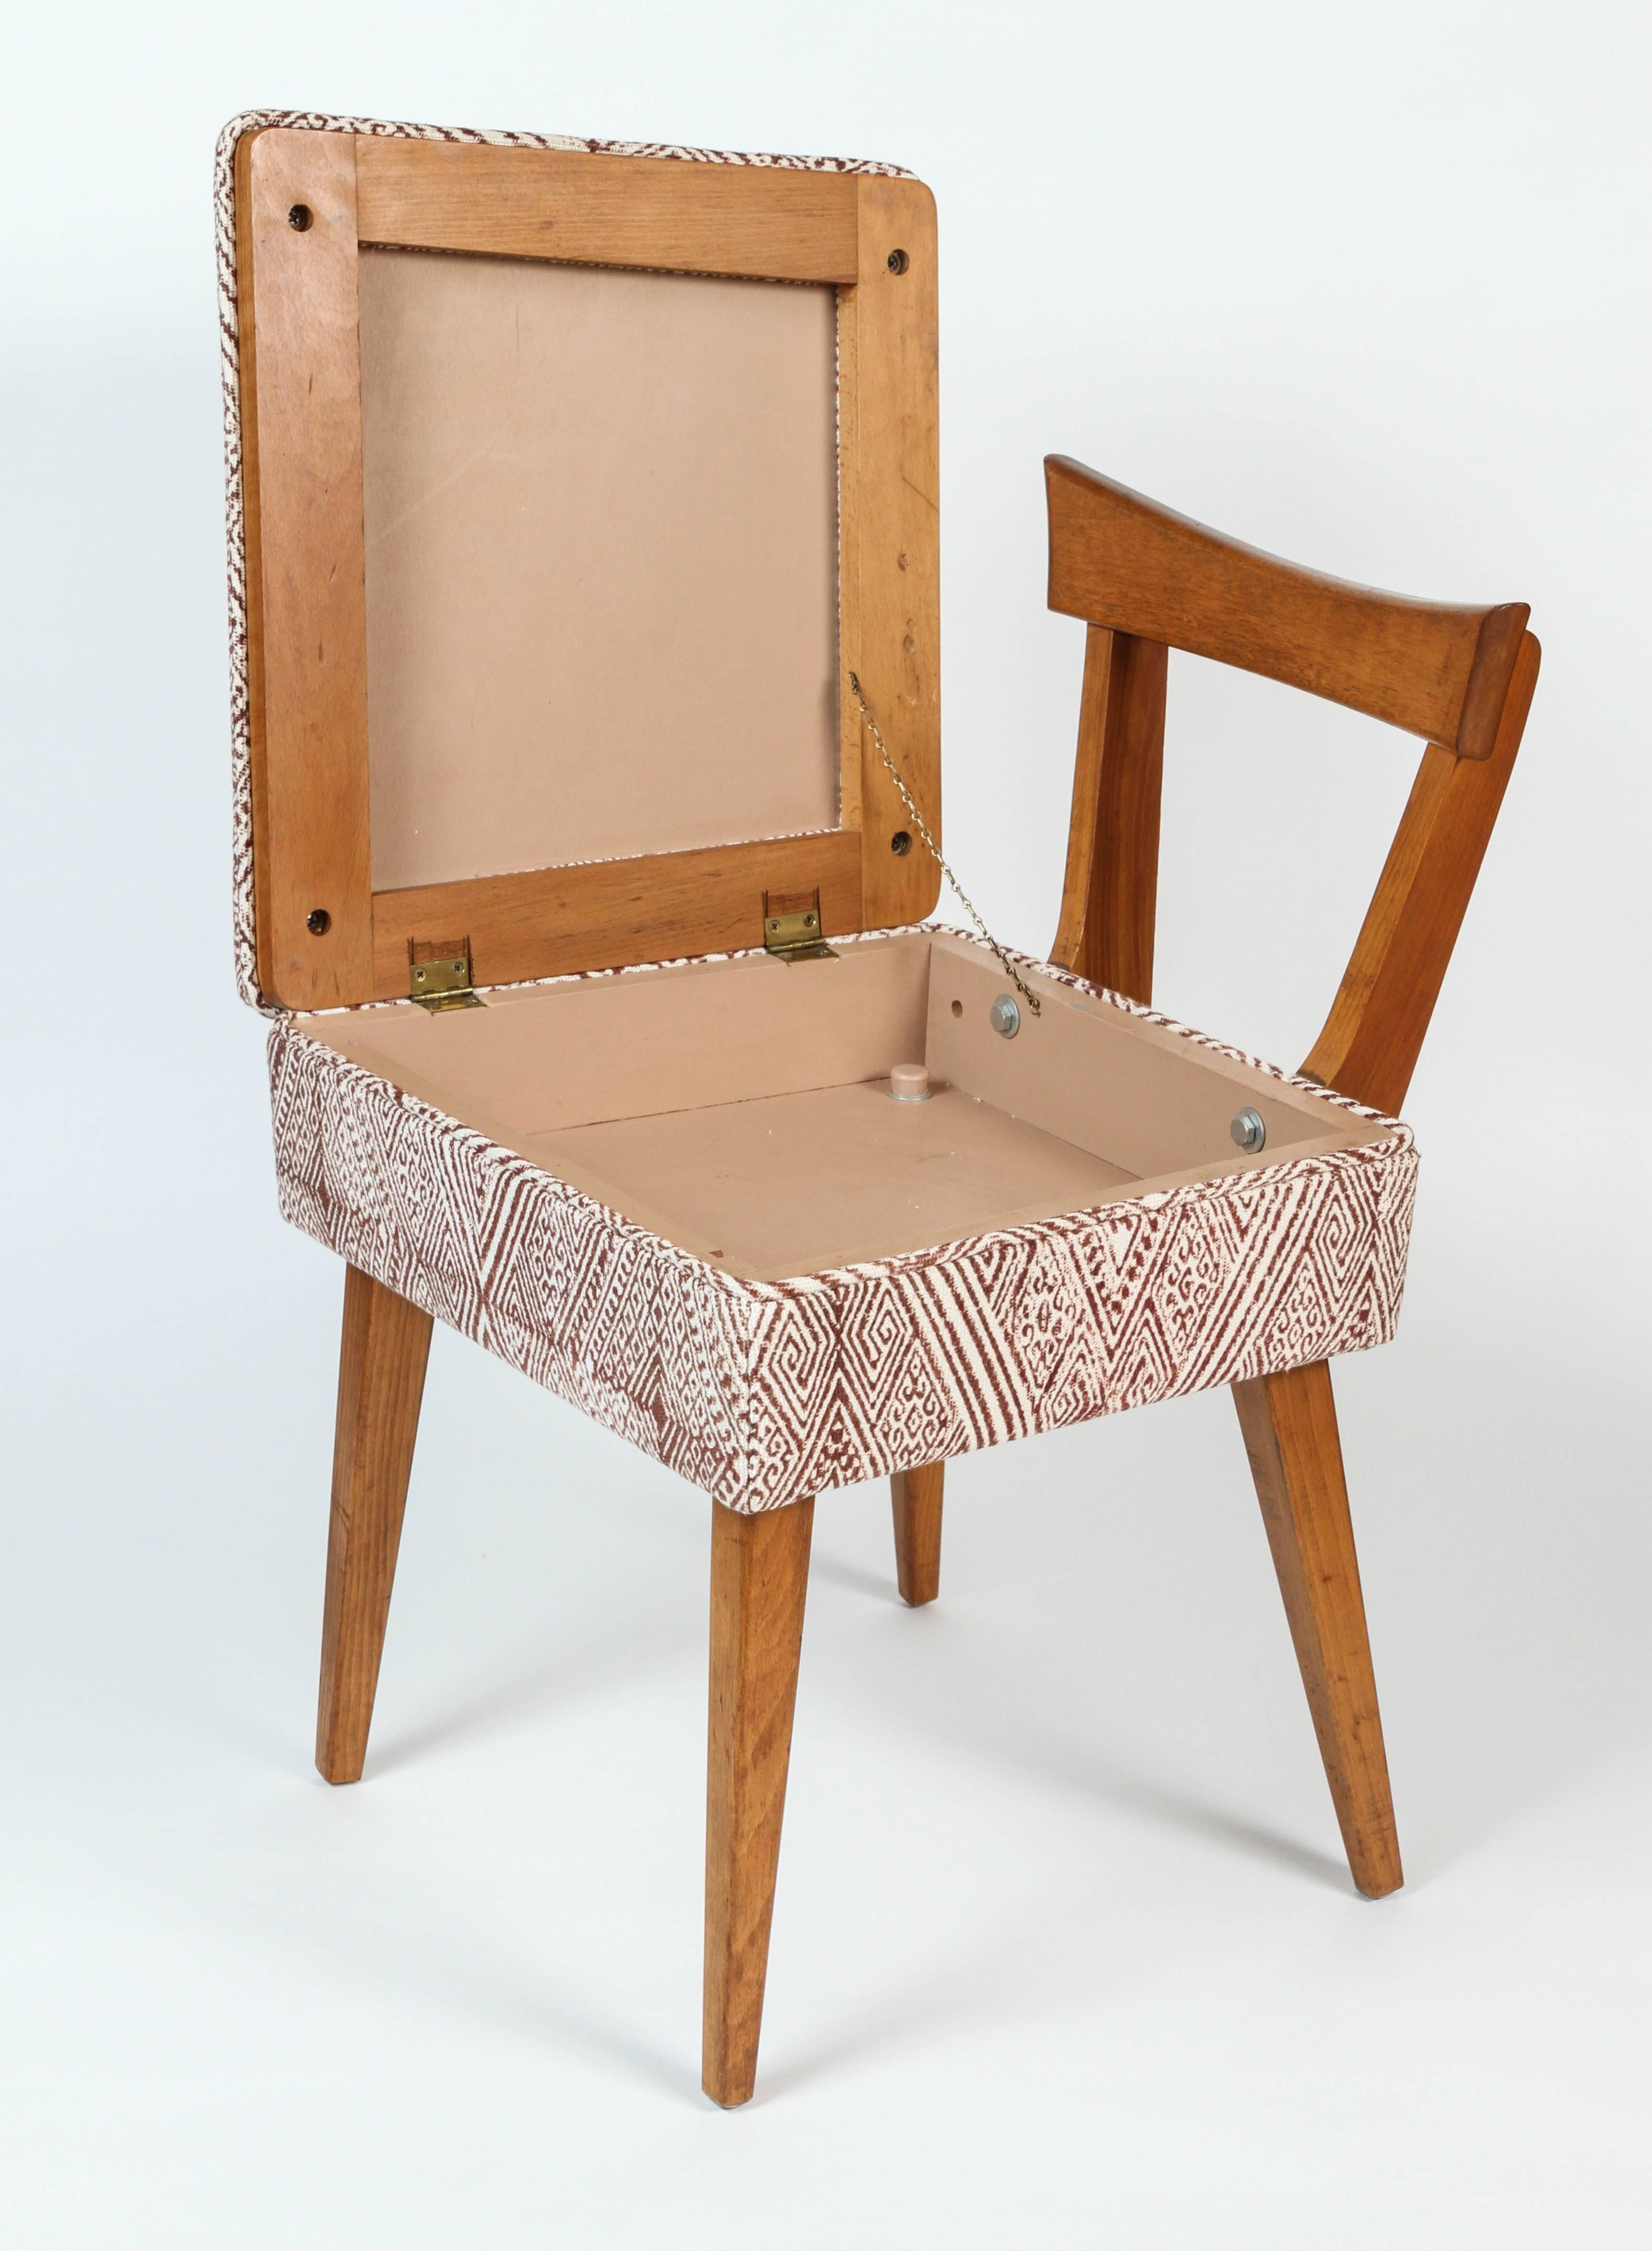 sewing chair with storage